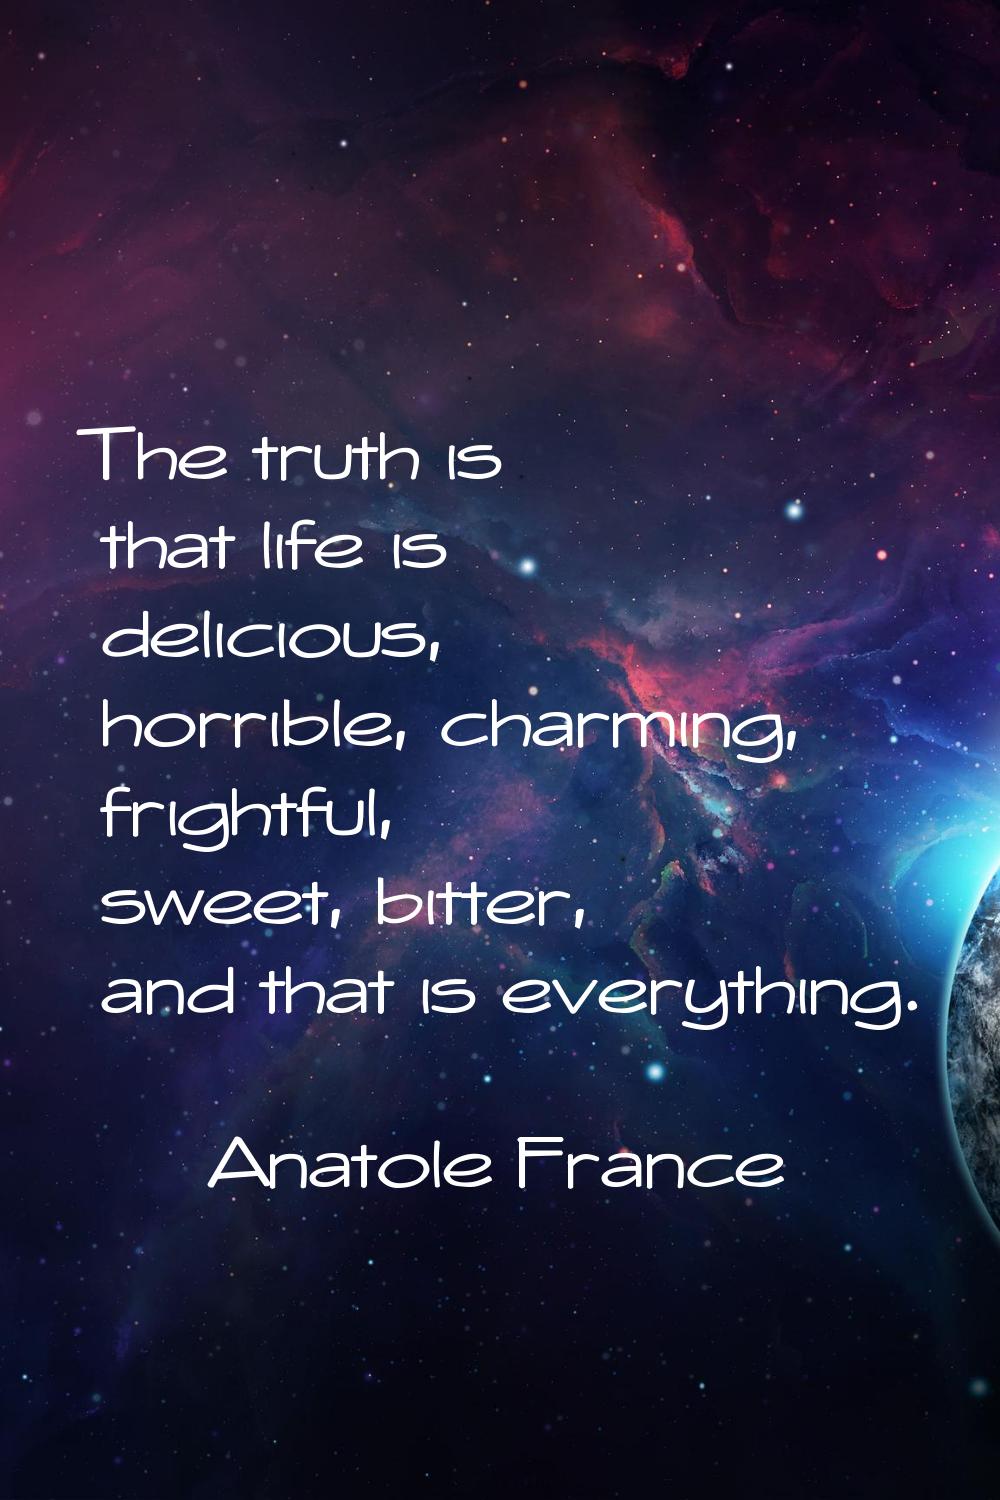 The truth is that life is delicious, horrible, charming, frightful, sweet, bitter, and that is ever